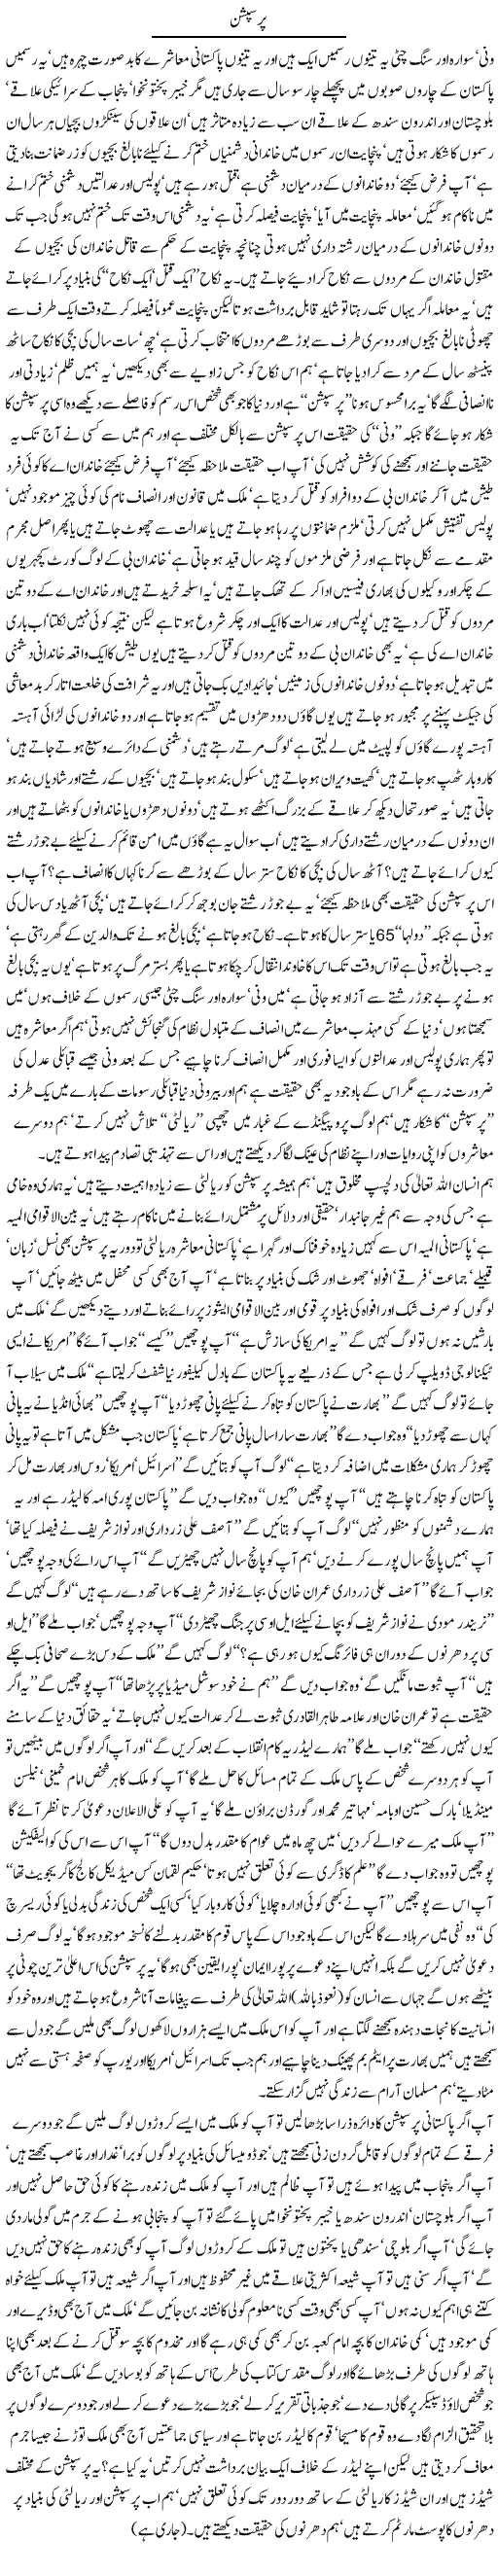 Perception 1 by Javed Chaudhry